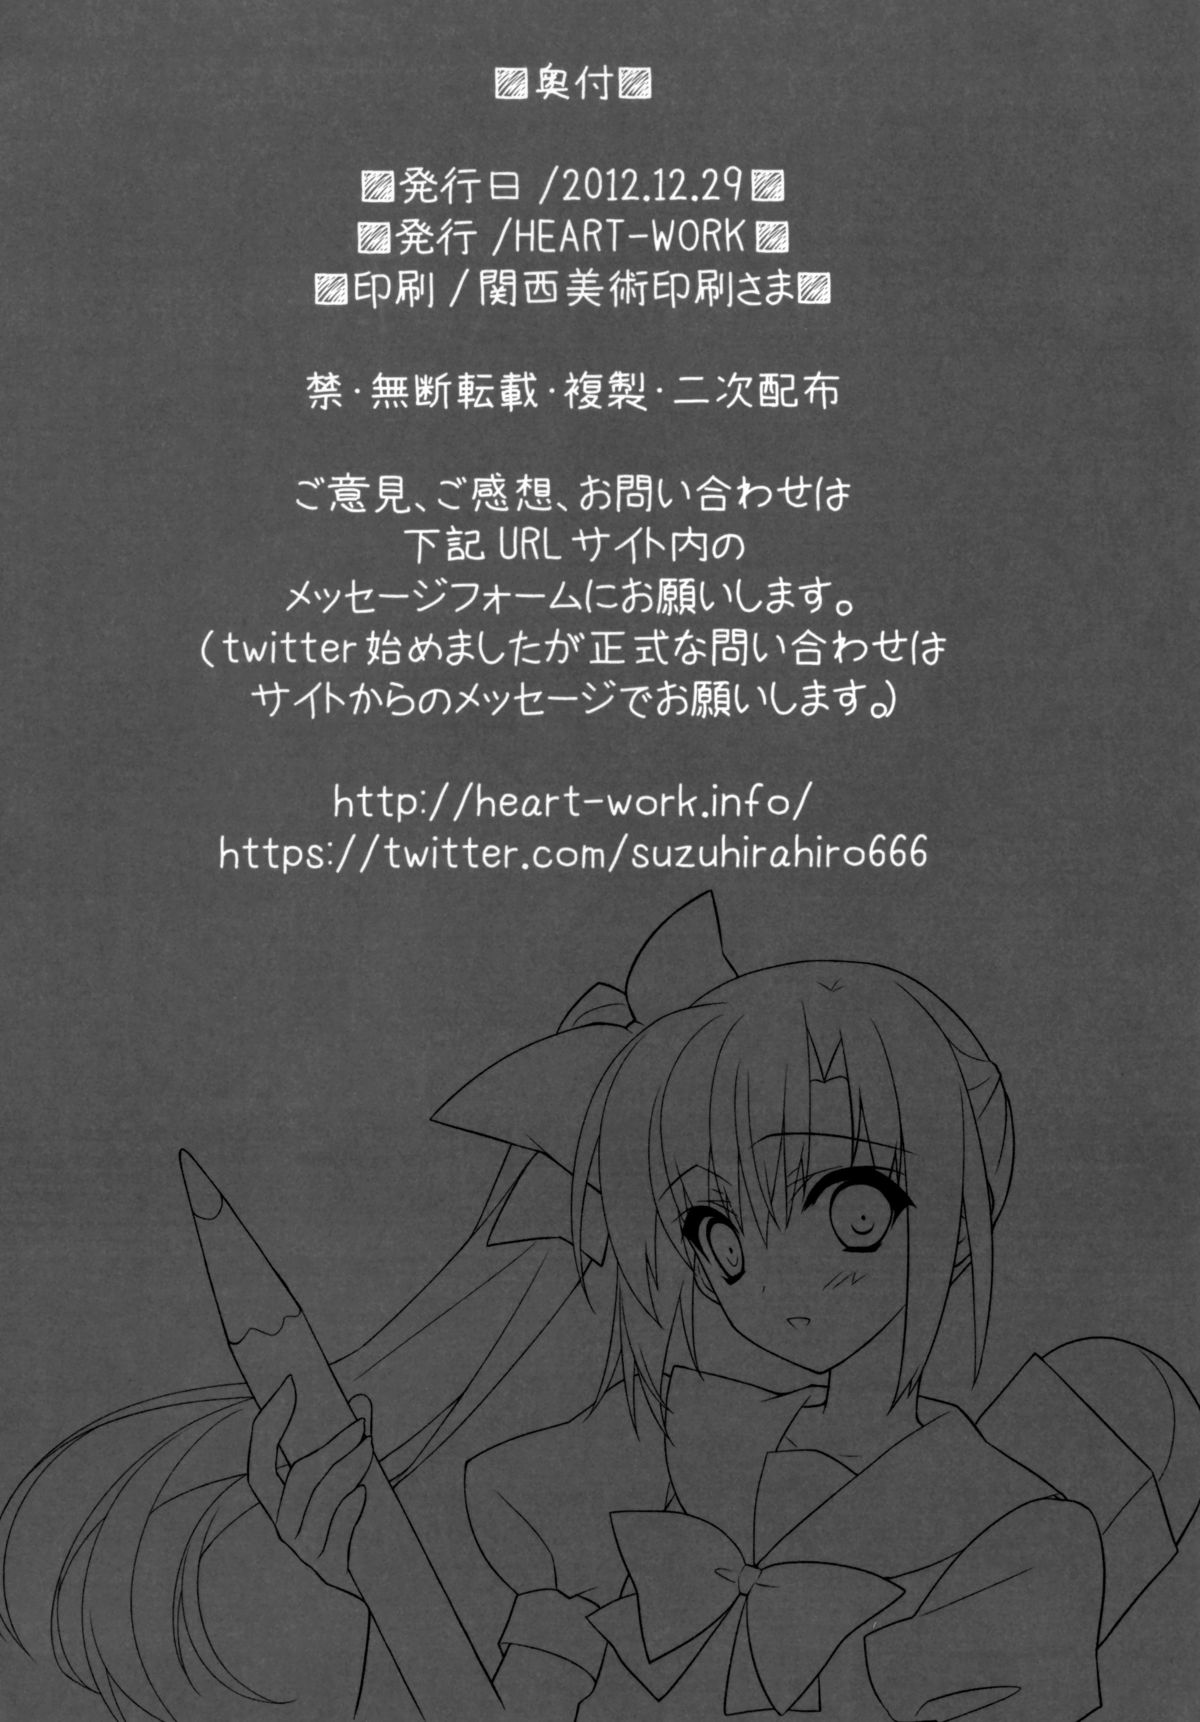 (C83) [HEART WORK (鈴平ひろ)] Waiting for you - HEART-WORK 2012.12.29 (よろず)